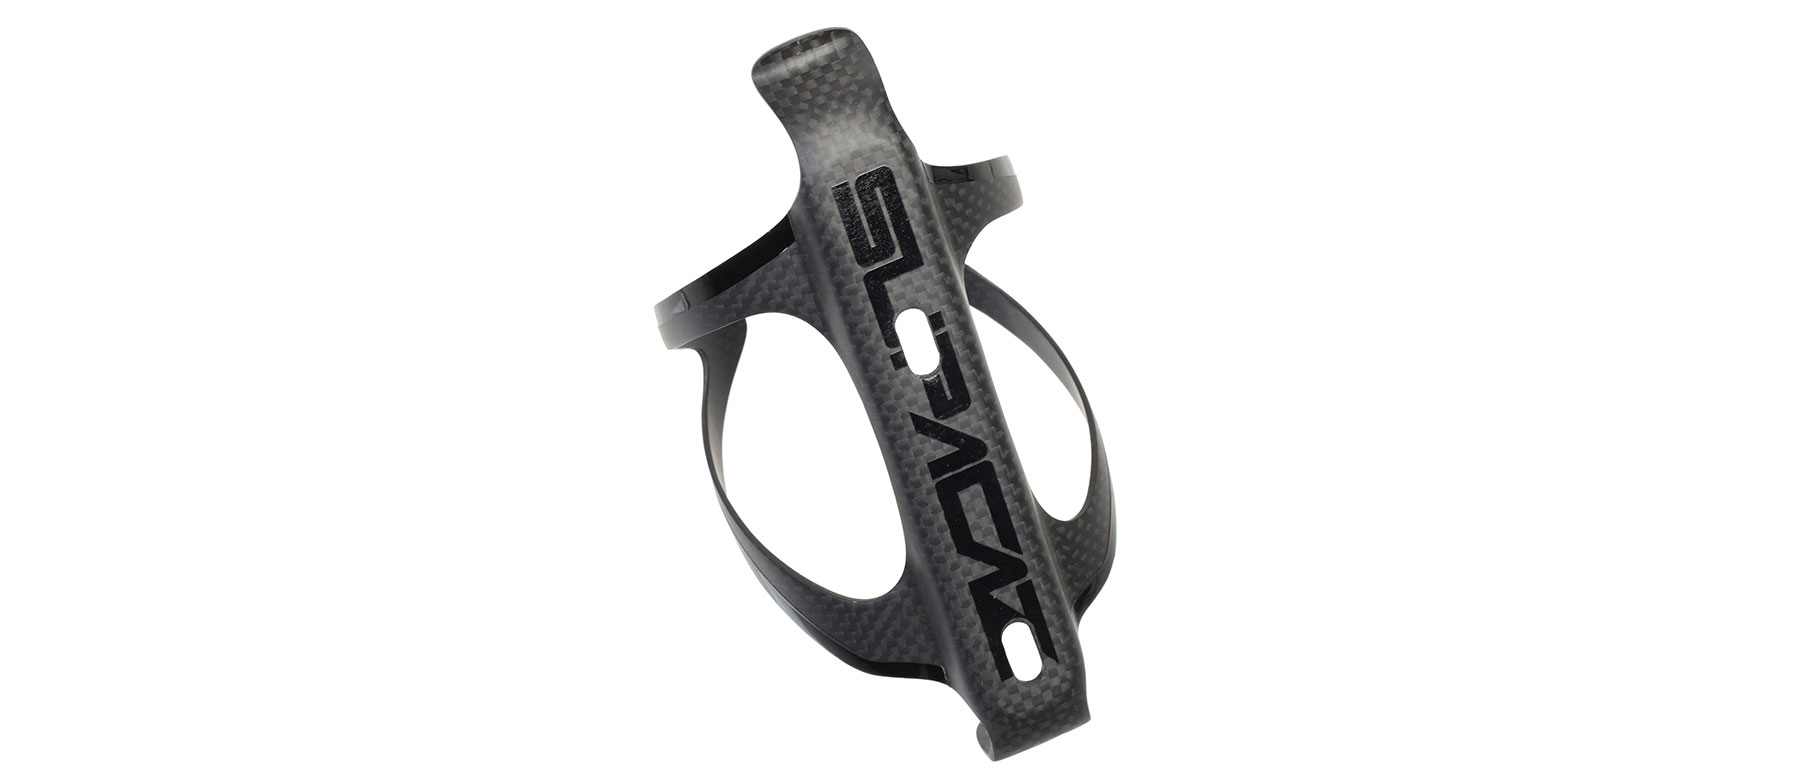 Supacaz Fly Carbon Cage